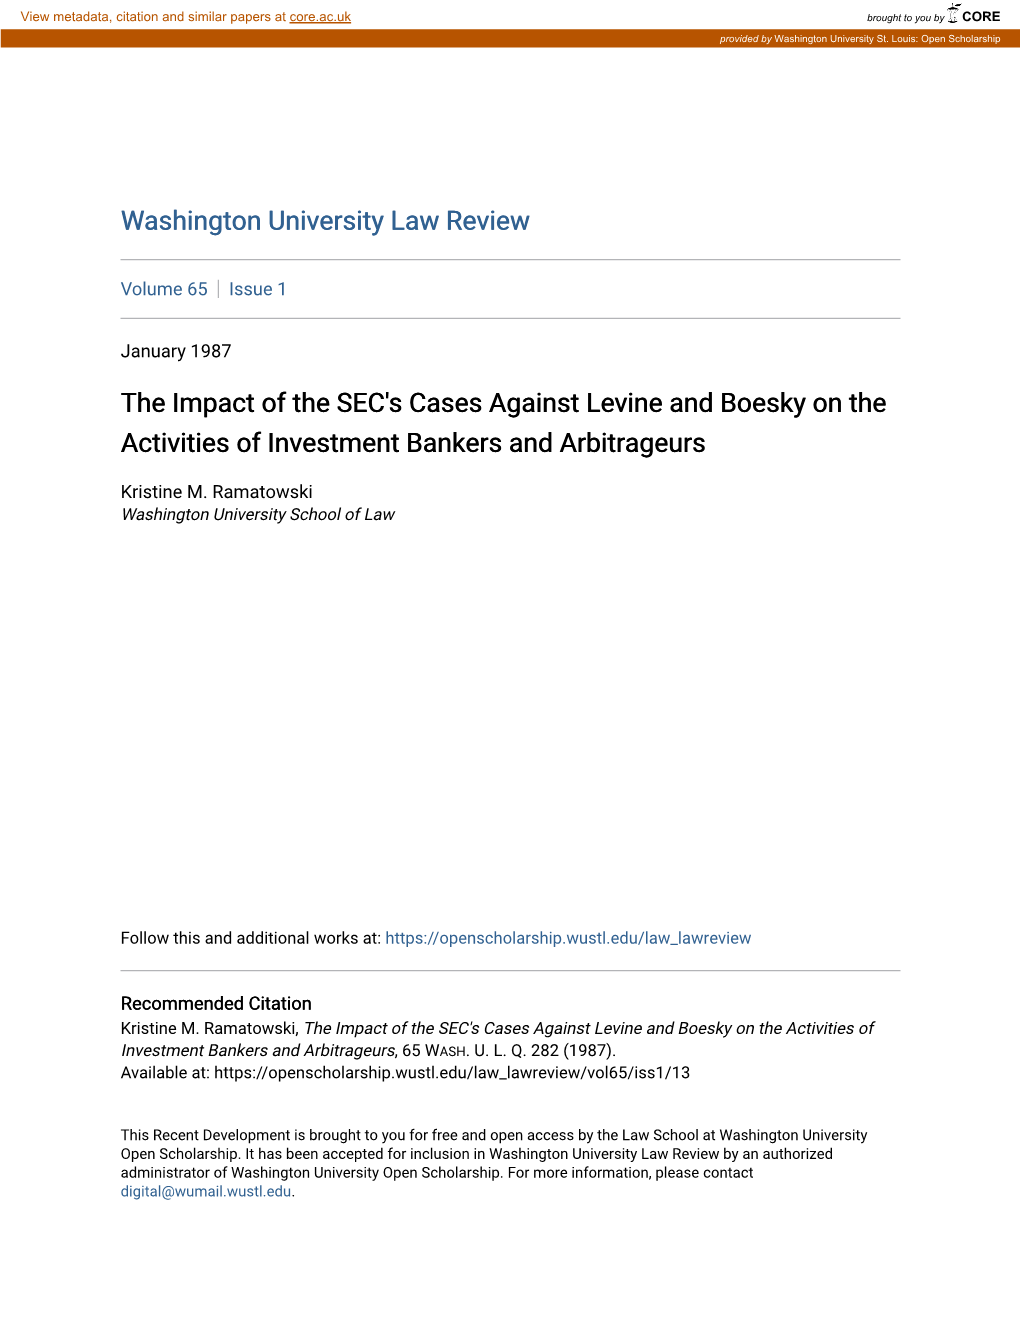 The Impact of the SEC's Cases Against Levine and Boesky on the Activities of Investment Bankers and Arbitrageurs